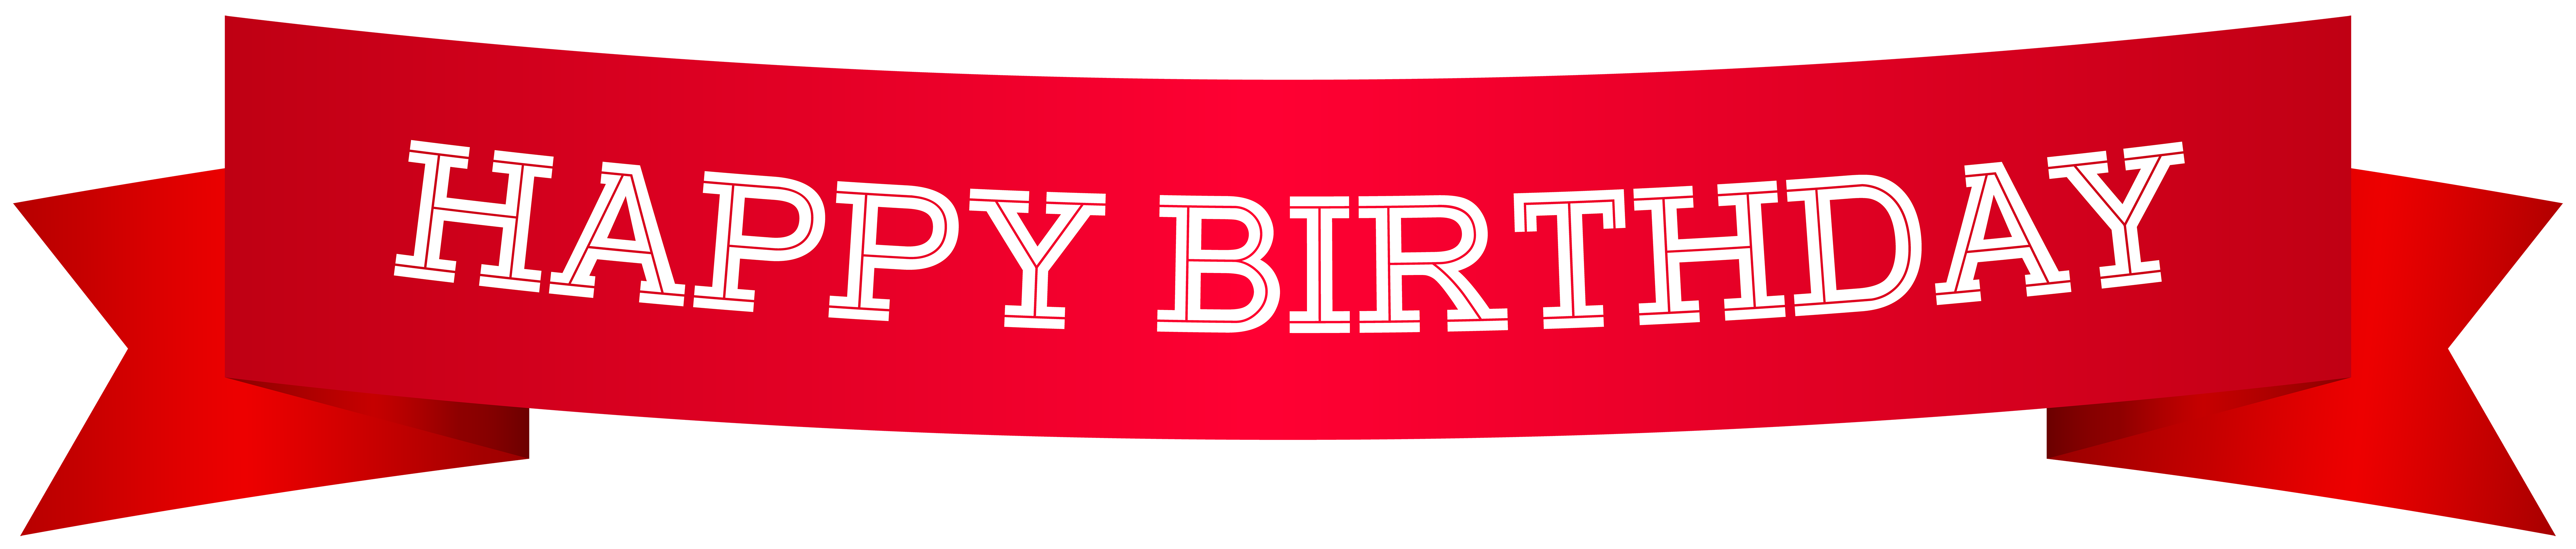 19-happy-birthday-banner-clipart-png-alade